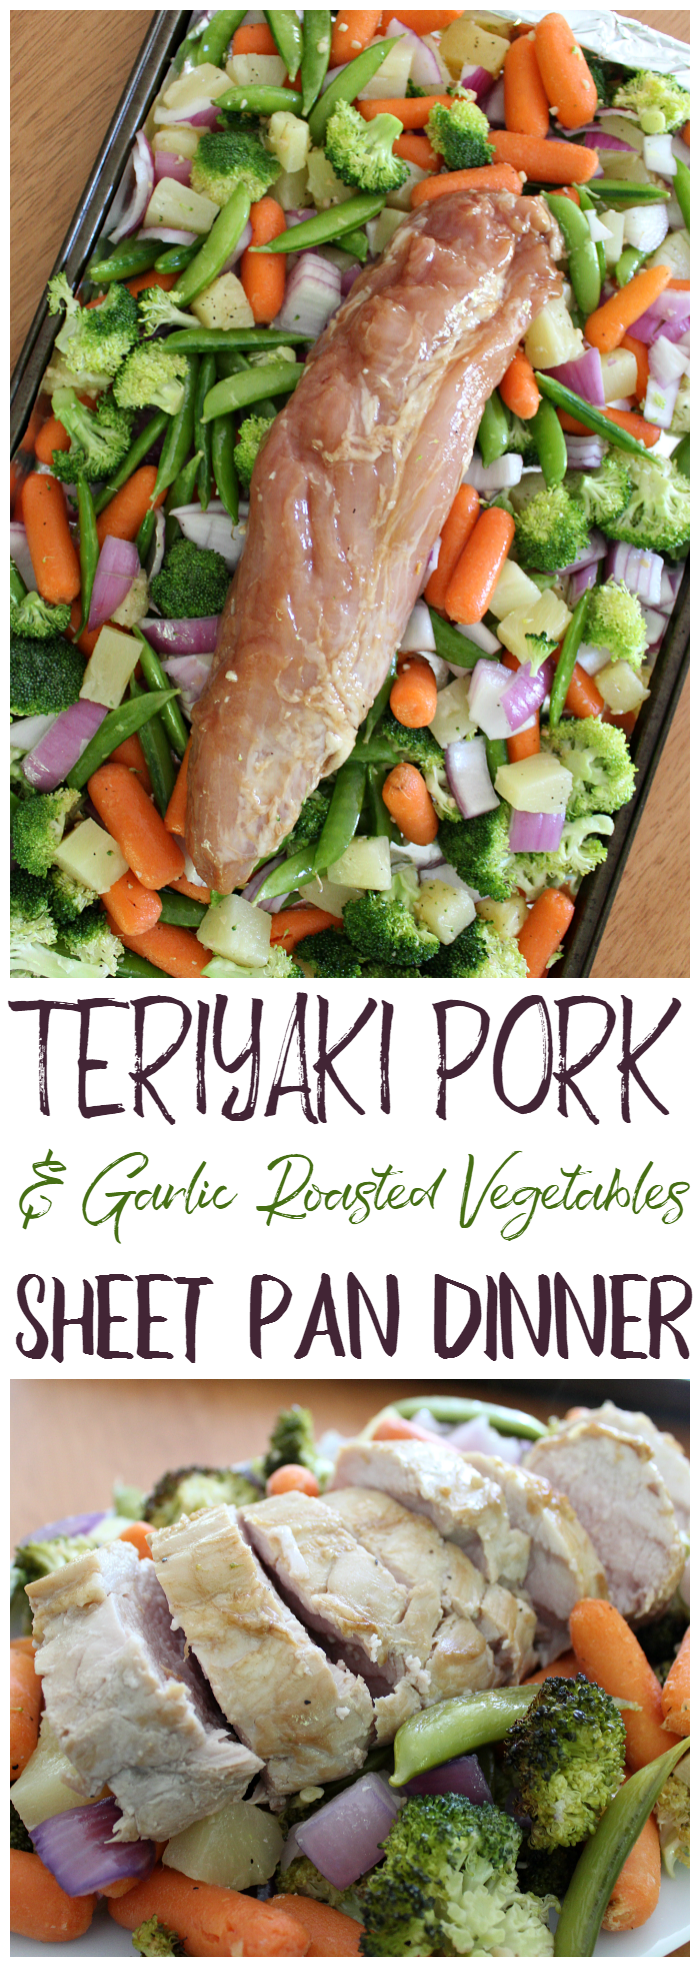 This Sheet Pan dinner comes together quickly with marinated teriyaki pork and garlic roasted vegetables.